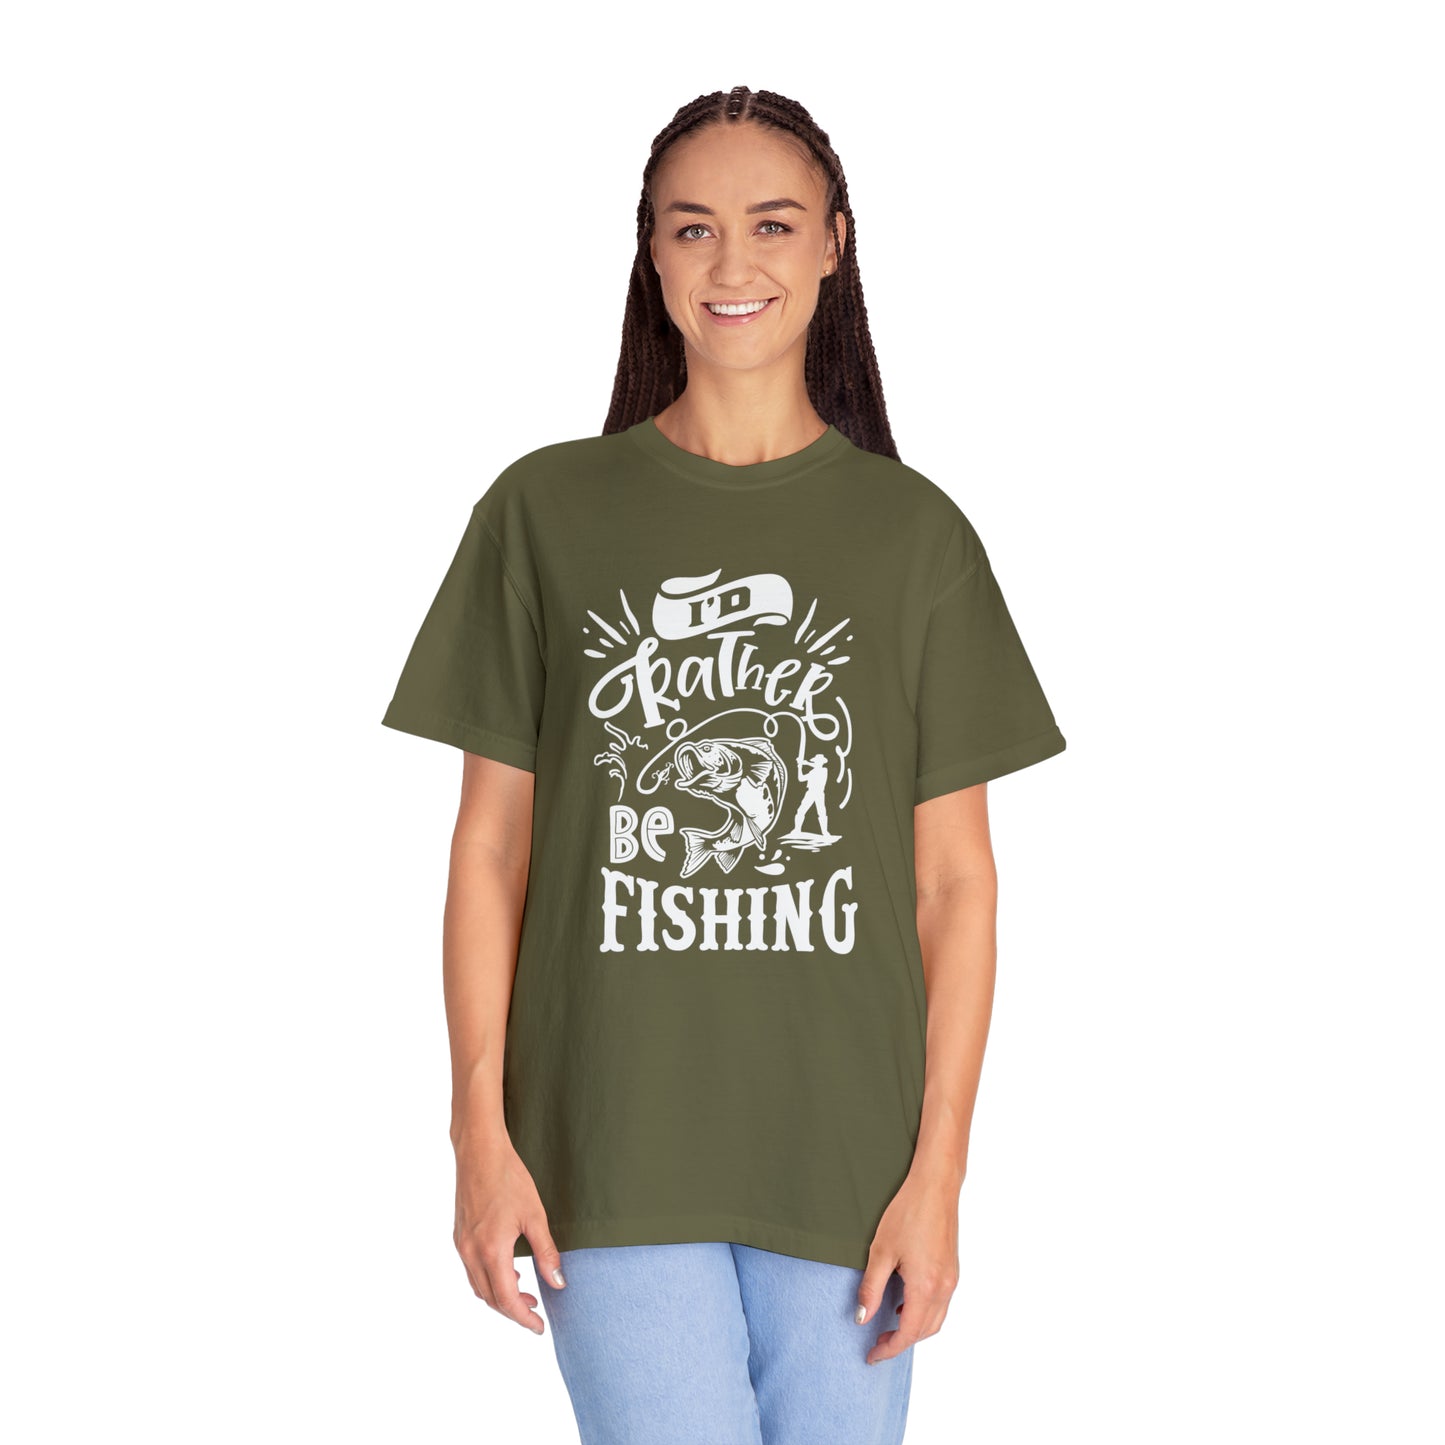 Embrace Your Passion: 'I'd Rather Be Fishing' T-Shirt